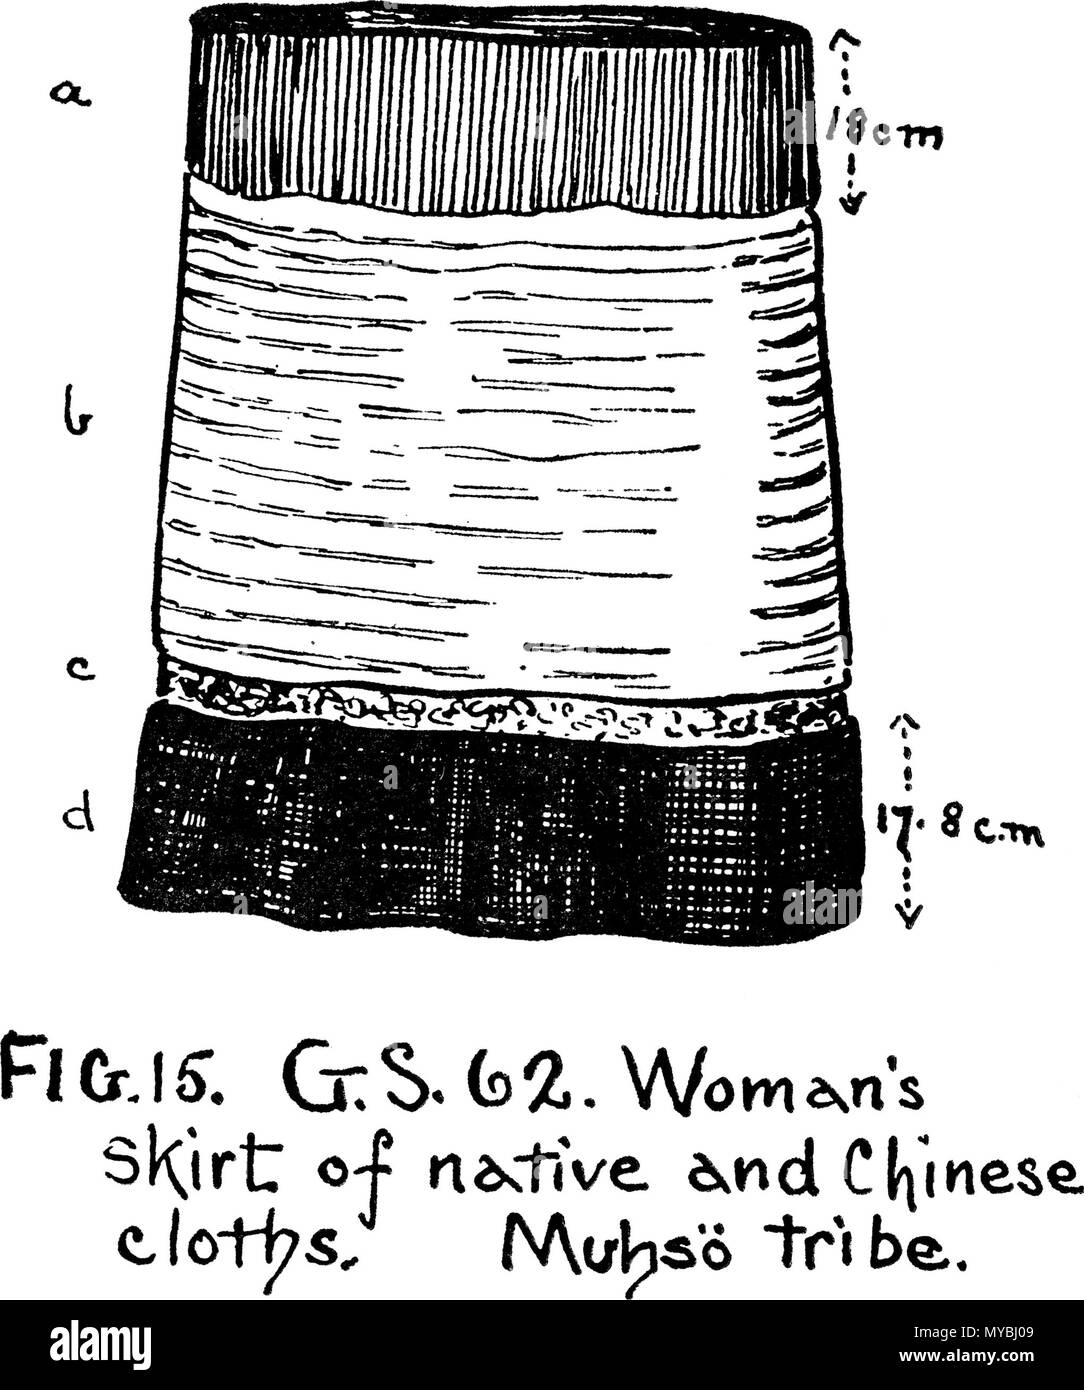 . English: A Figure from the booklet: 'Burmese textiles'. Fig. 15. G. S. 62. Woman's skirt of native and Chinese cloths. Muhsö tribe. March 1917. Laura E. Start 91 Burmese Textiles Fig15 Stock Photo